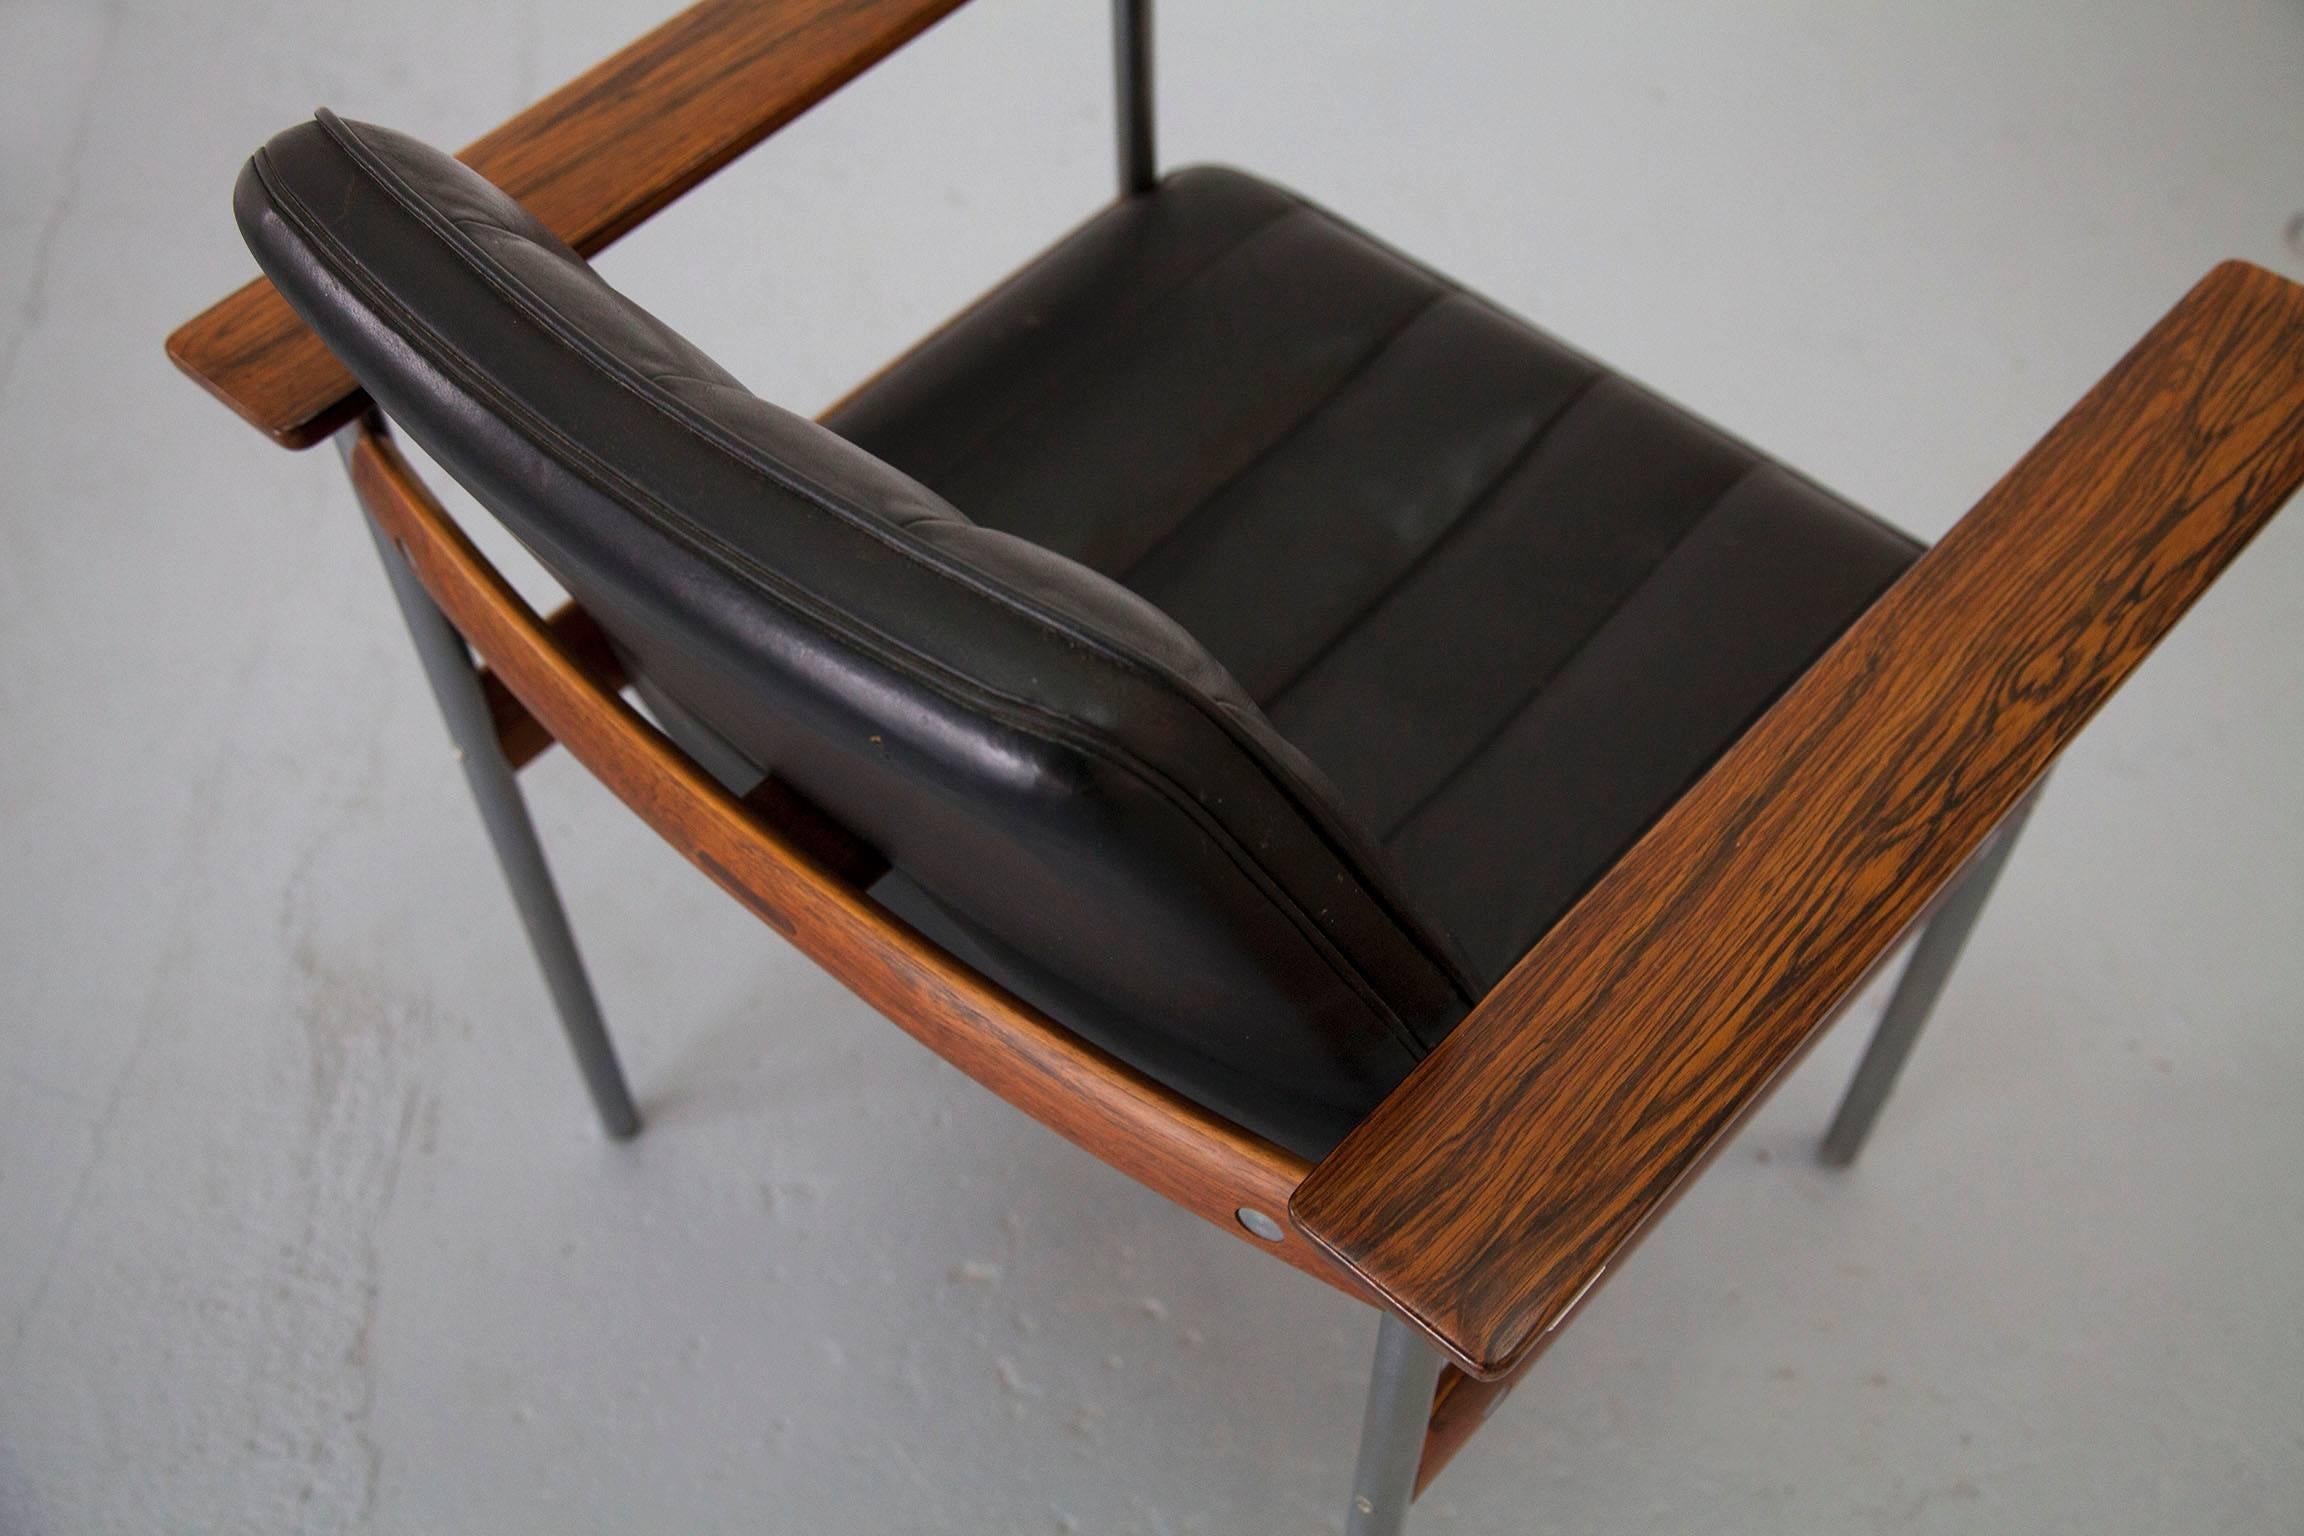 Five Rosewood & Leather Armchairs & Coffee Table by Sven Ivar Dysthe for Dokka 1